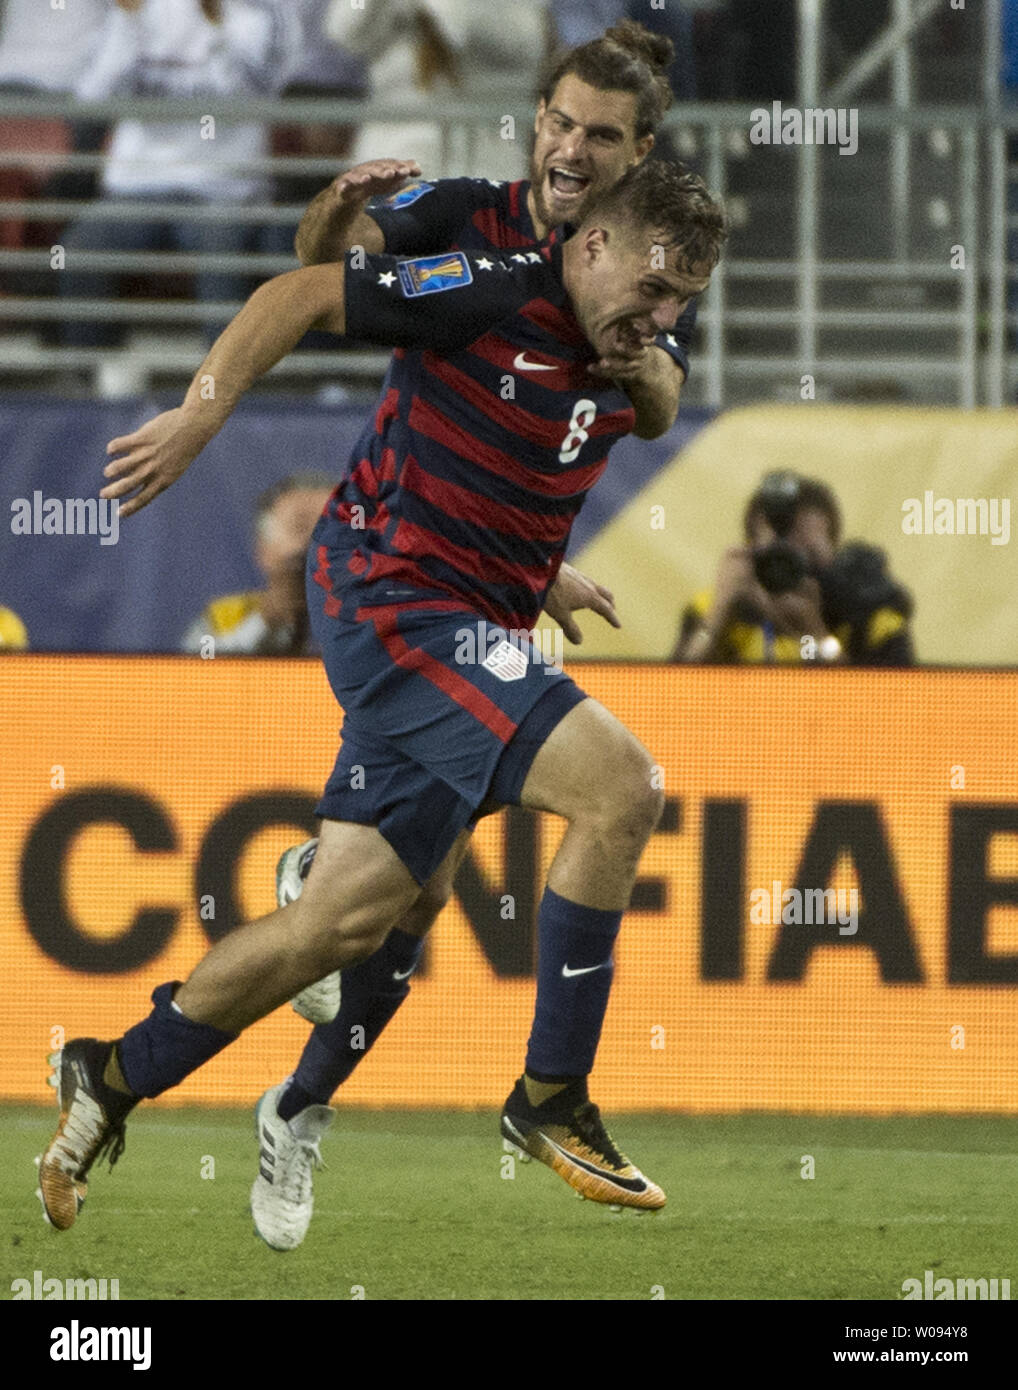 Graham Zusi congratulates USA's Jordan Morris (8) after a goal against Jamaica in the second half of the finals of the CONCACAF Gold Cup at Levi's Stadium in Santa Clara on July 26, 2017. The goal proved to be the winning margin as the USA defeated Jamaica 2-1.    Photo by Terry Schmitt/UPI Stock Photo